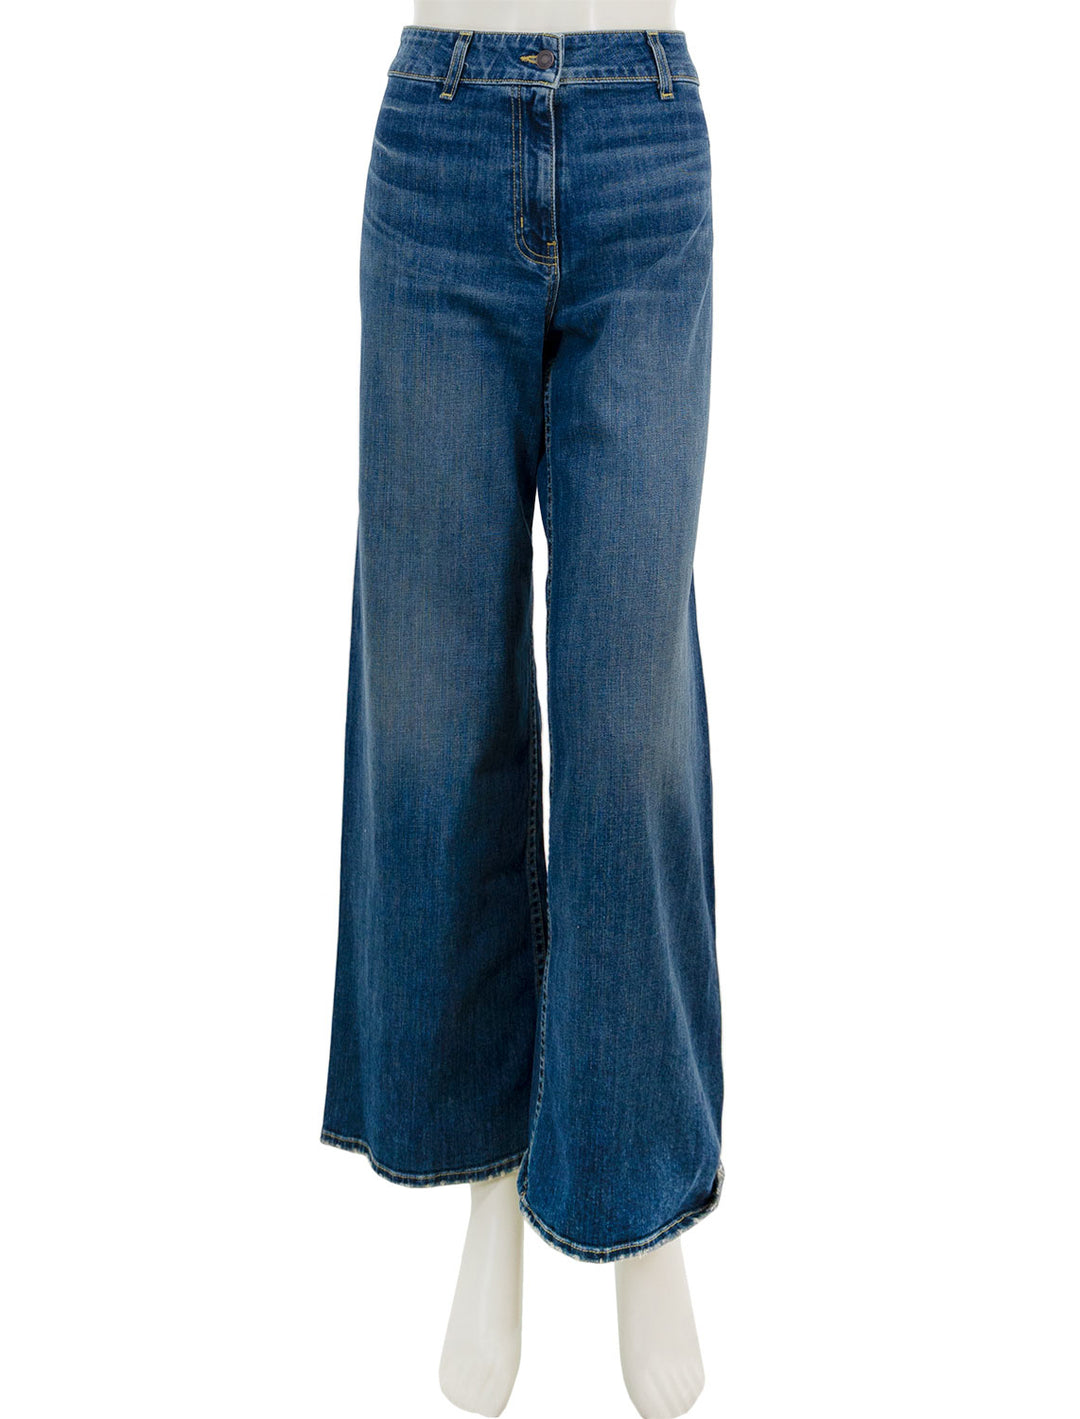 Front view of Nili Lotan's megan jean in classic wash.